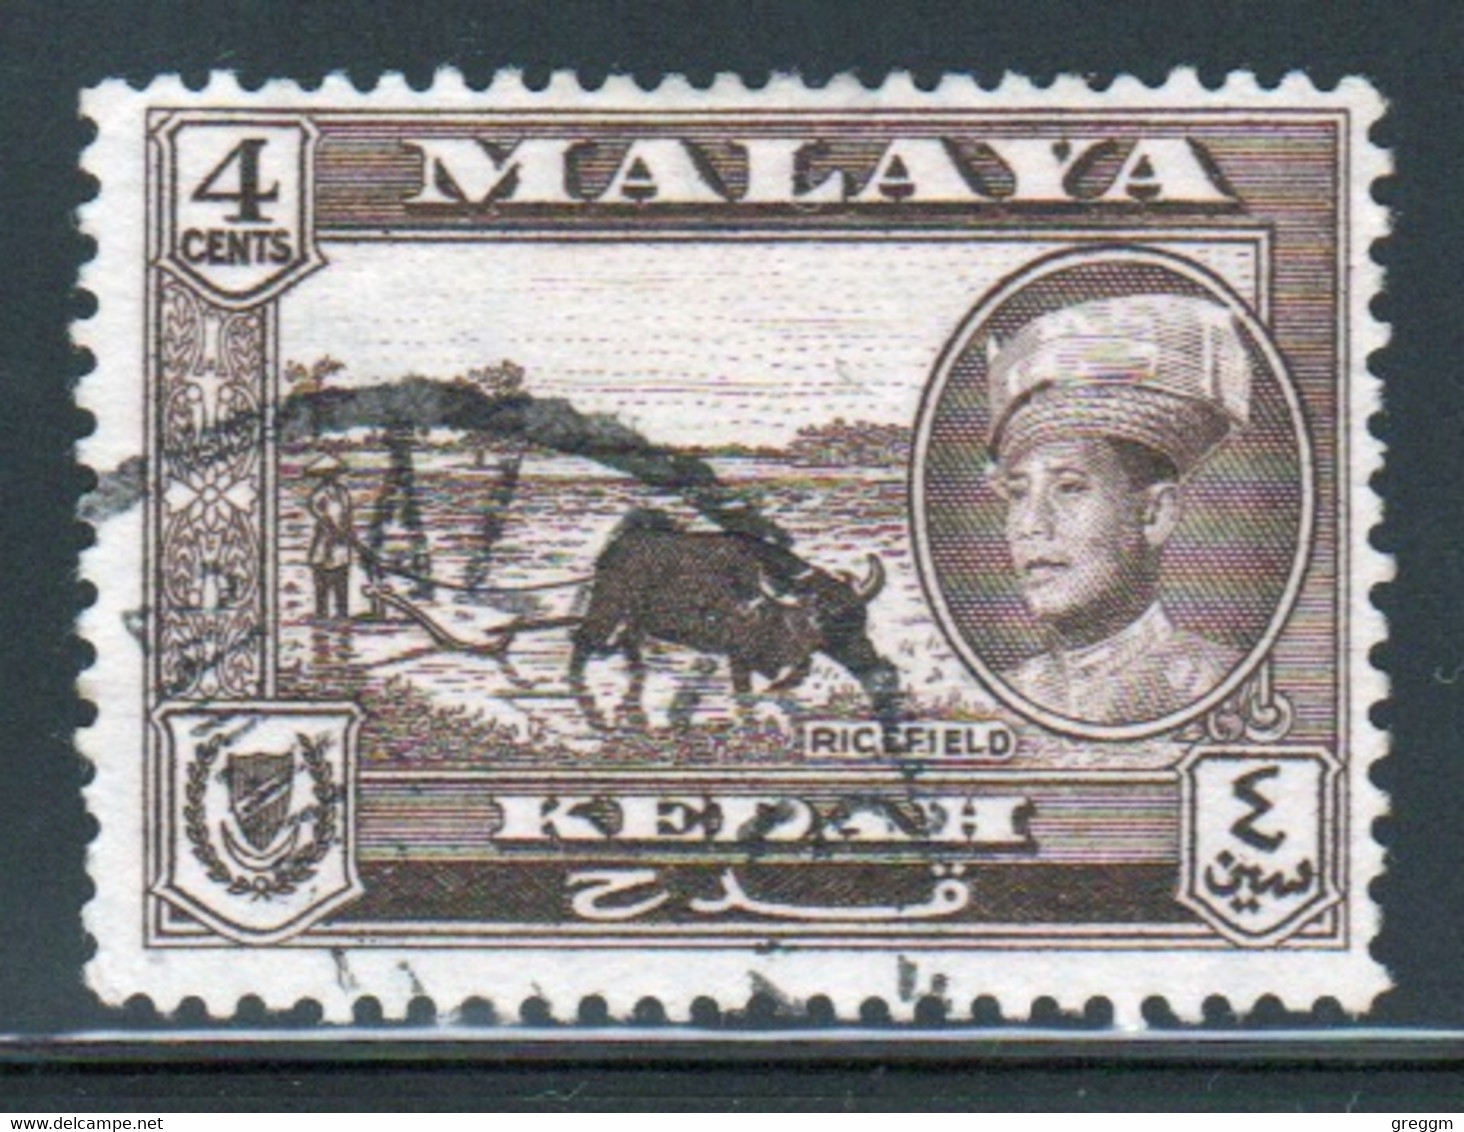 Malaysia Kedah 1959 Single 4c Definitive Stamp Which Is I Believe Cat No 106 In Fine Used - Kedah